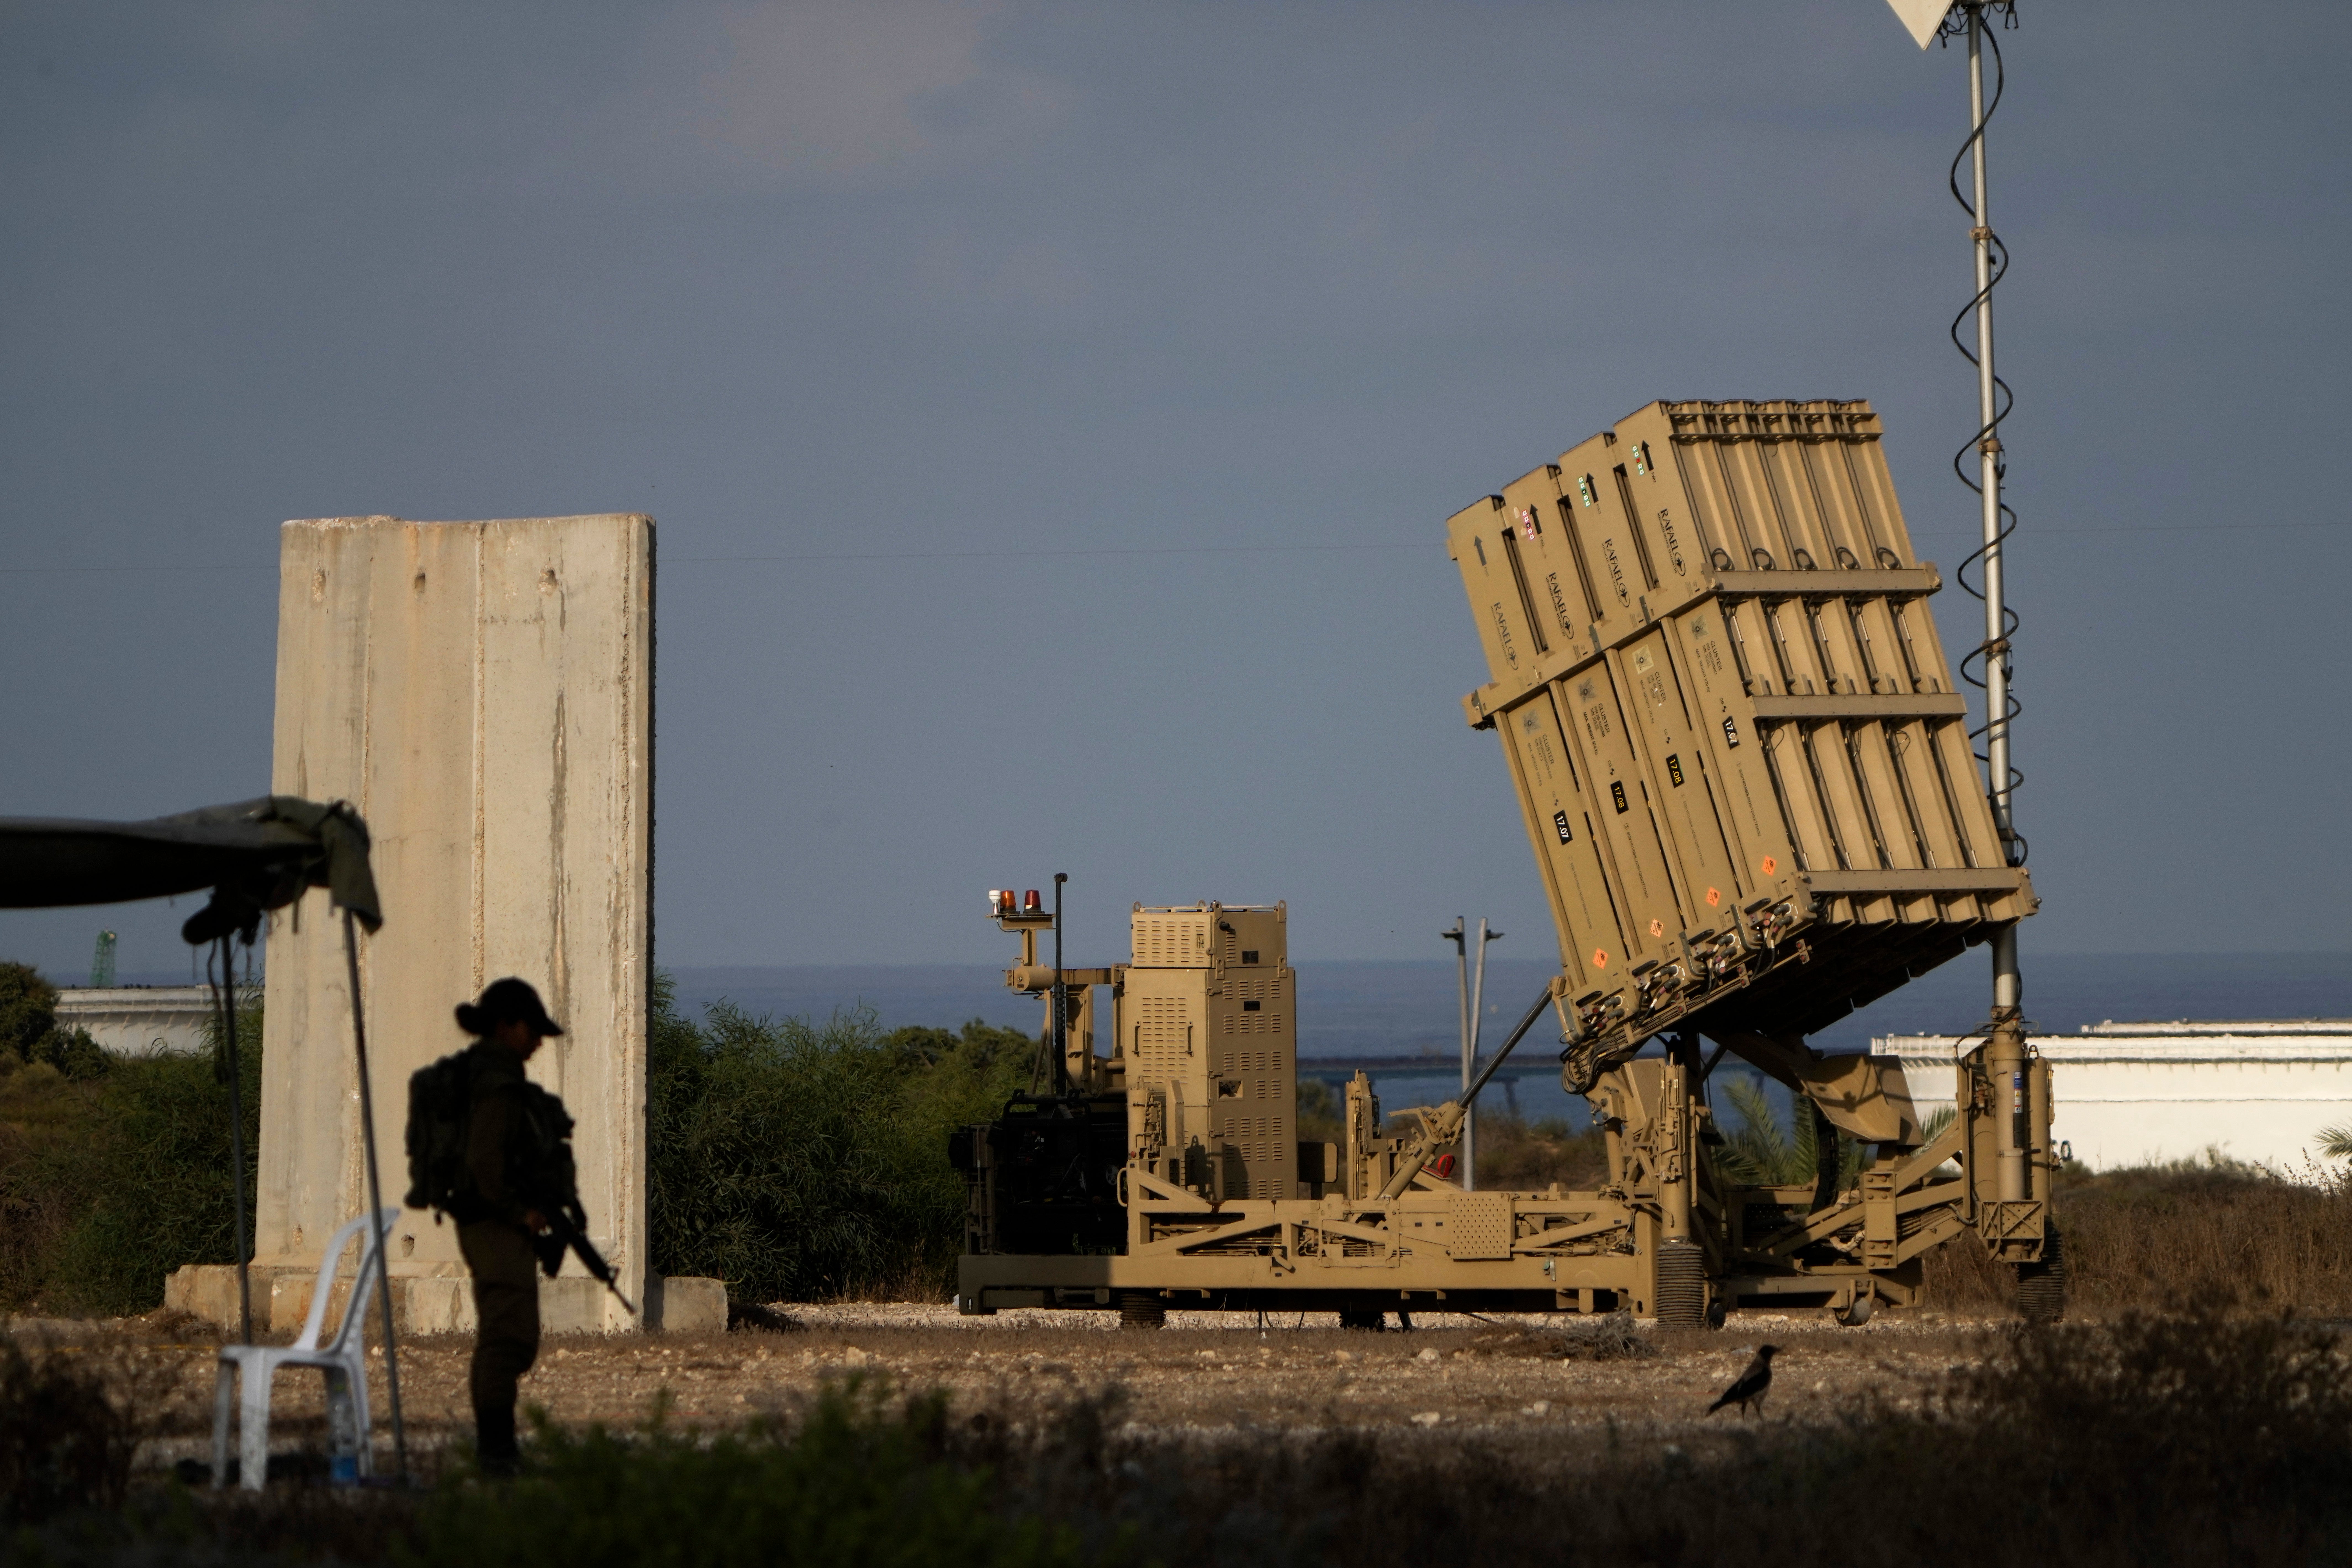 A battery of Israel's Iron Dome defense missile system, deployed to intercept rockets, sits in Ashkelon, southern Israel, August 2022